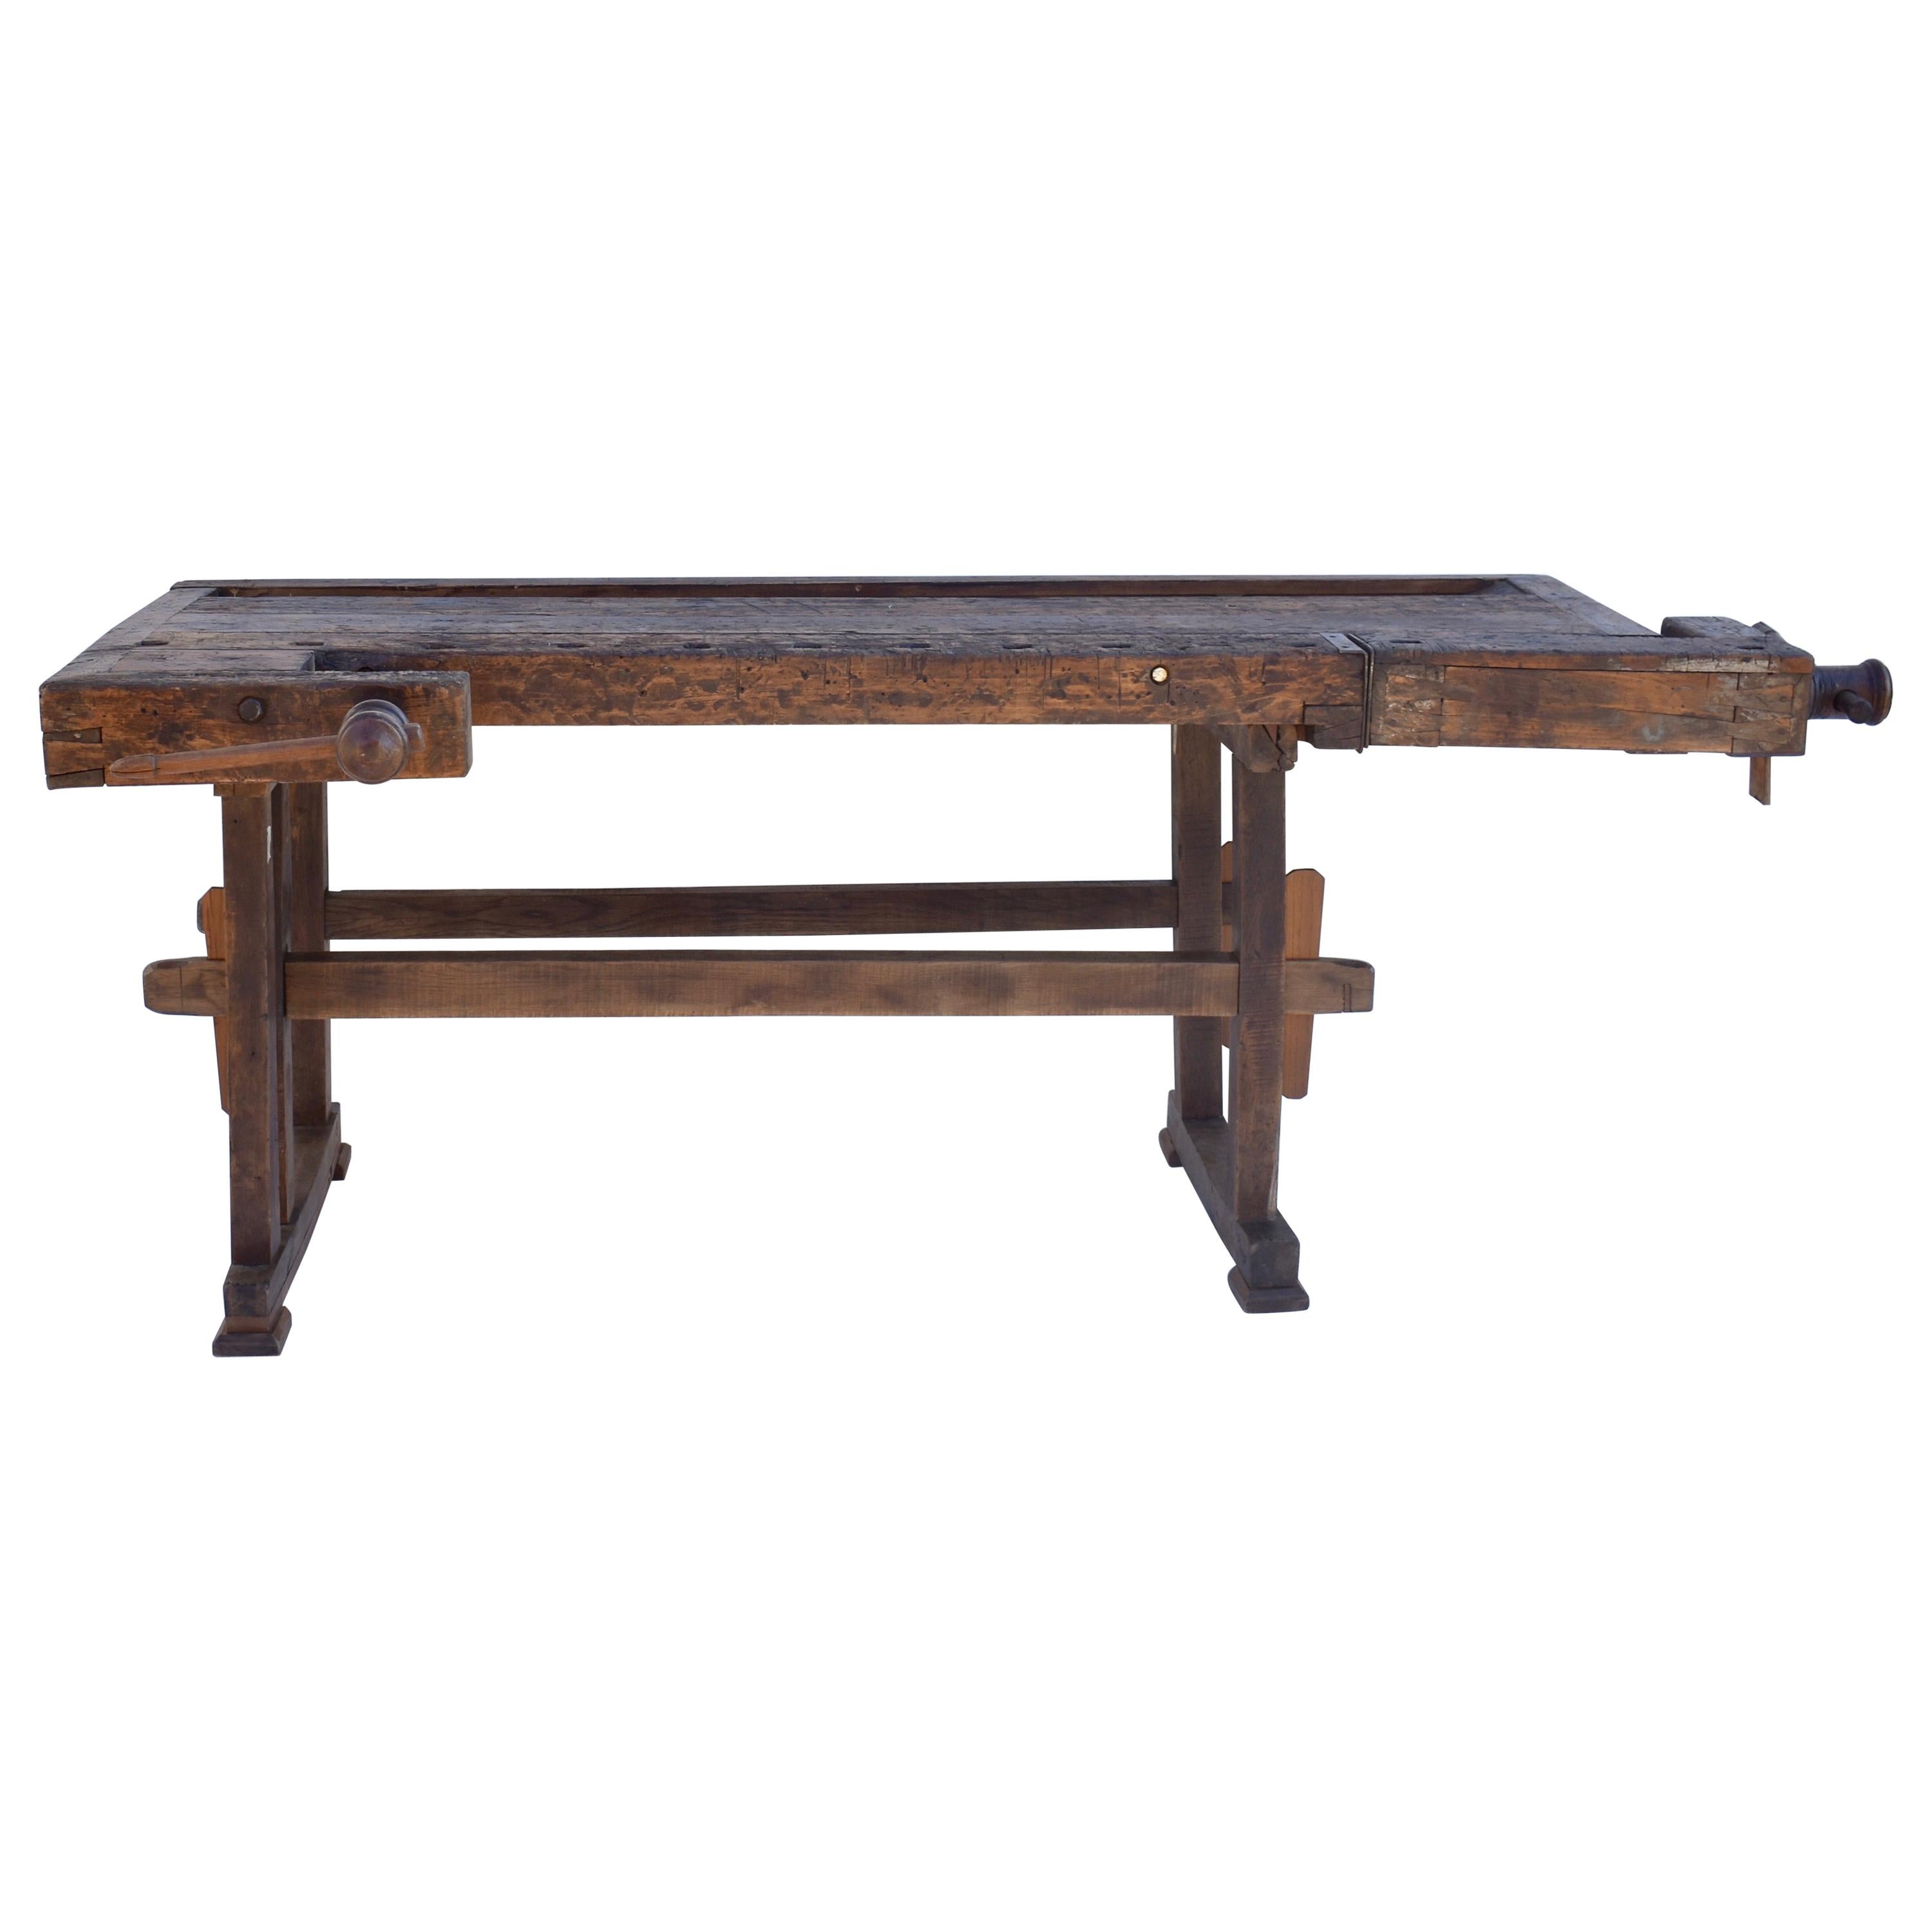 Vintage Oak Carpenters and Joiners Workbench